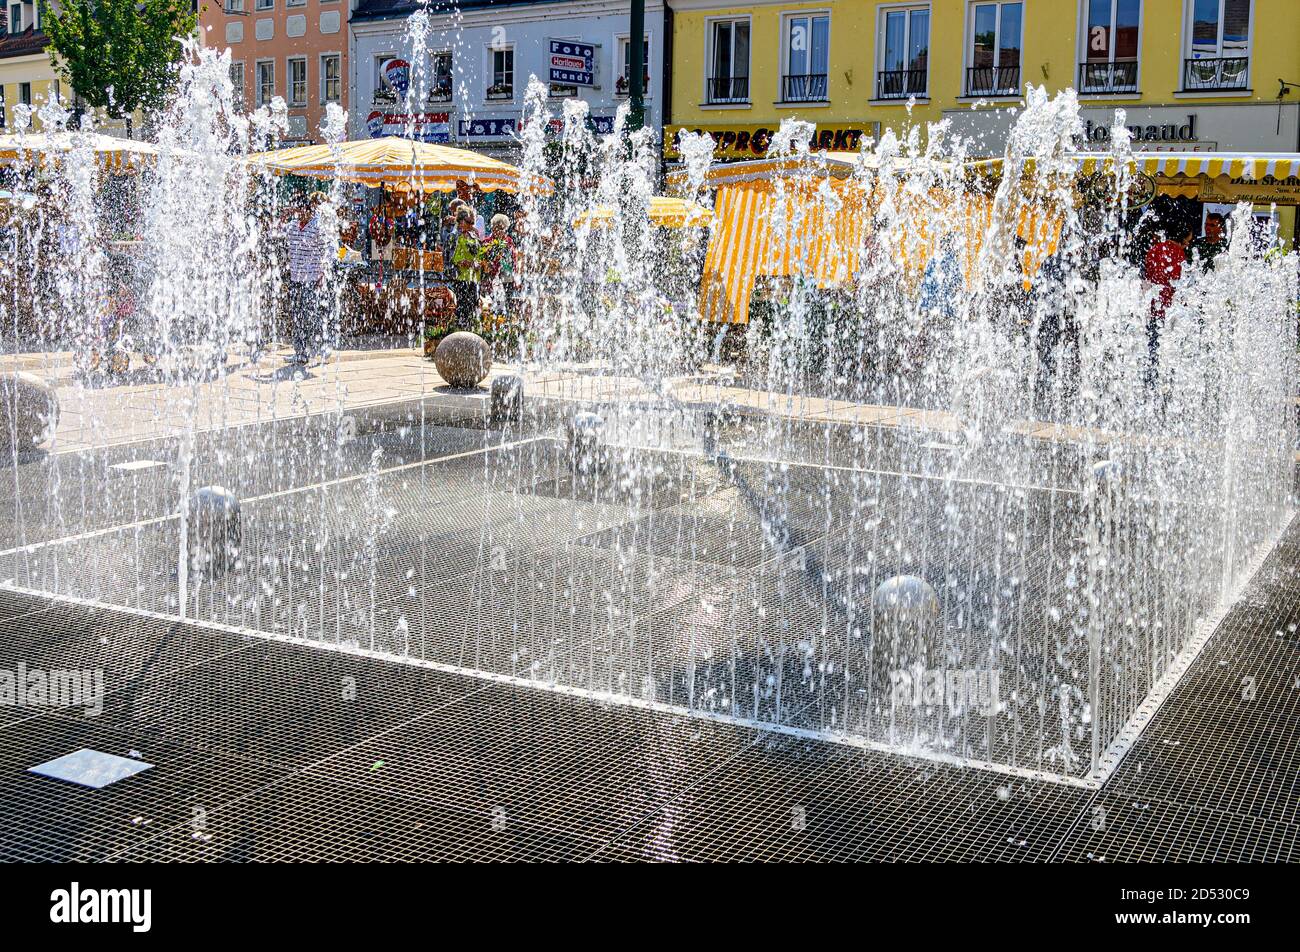 trick fountains on the main place of the city of Tulln in sunshine, Austria Stock Photo